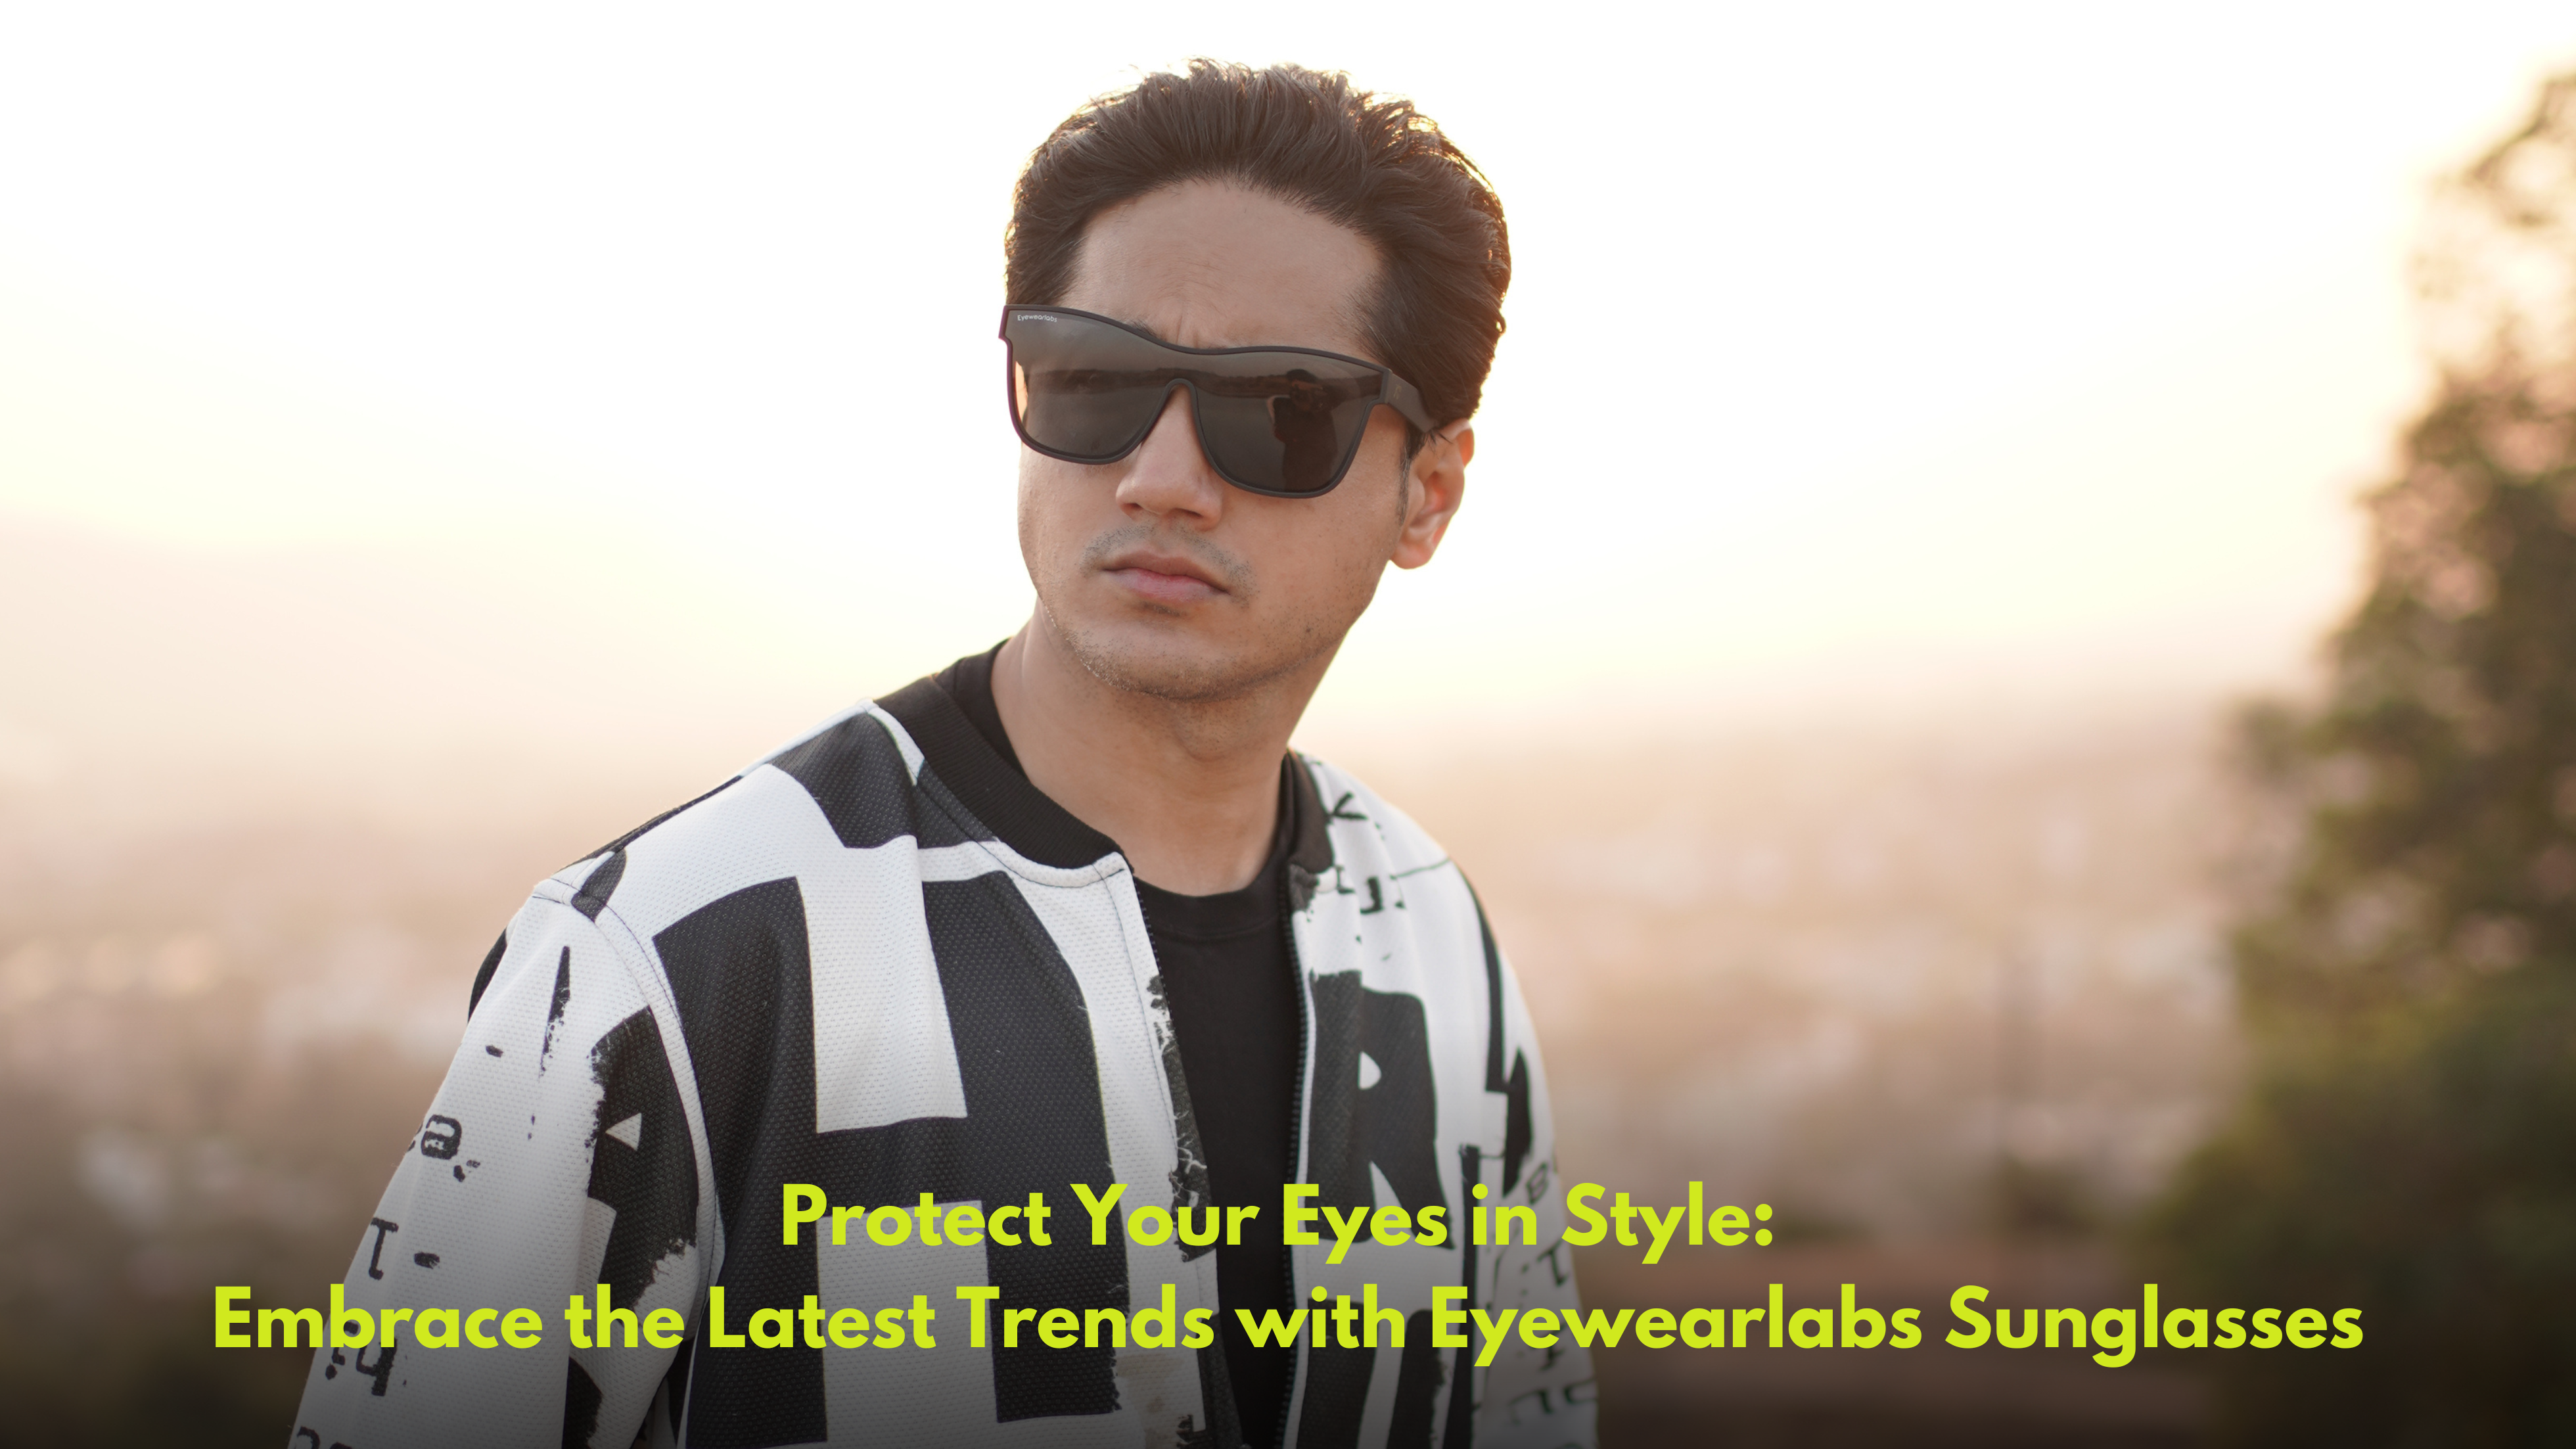 Protect Your Eyes in Style: Embrace the Latest Trends with Eyewearlabs Sunglasses